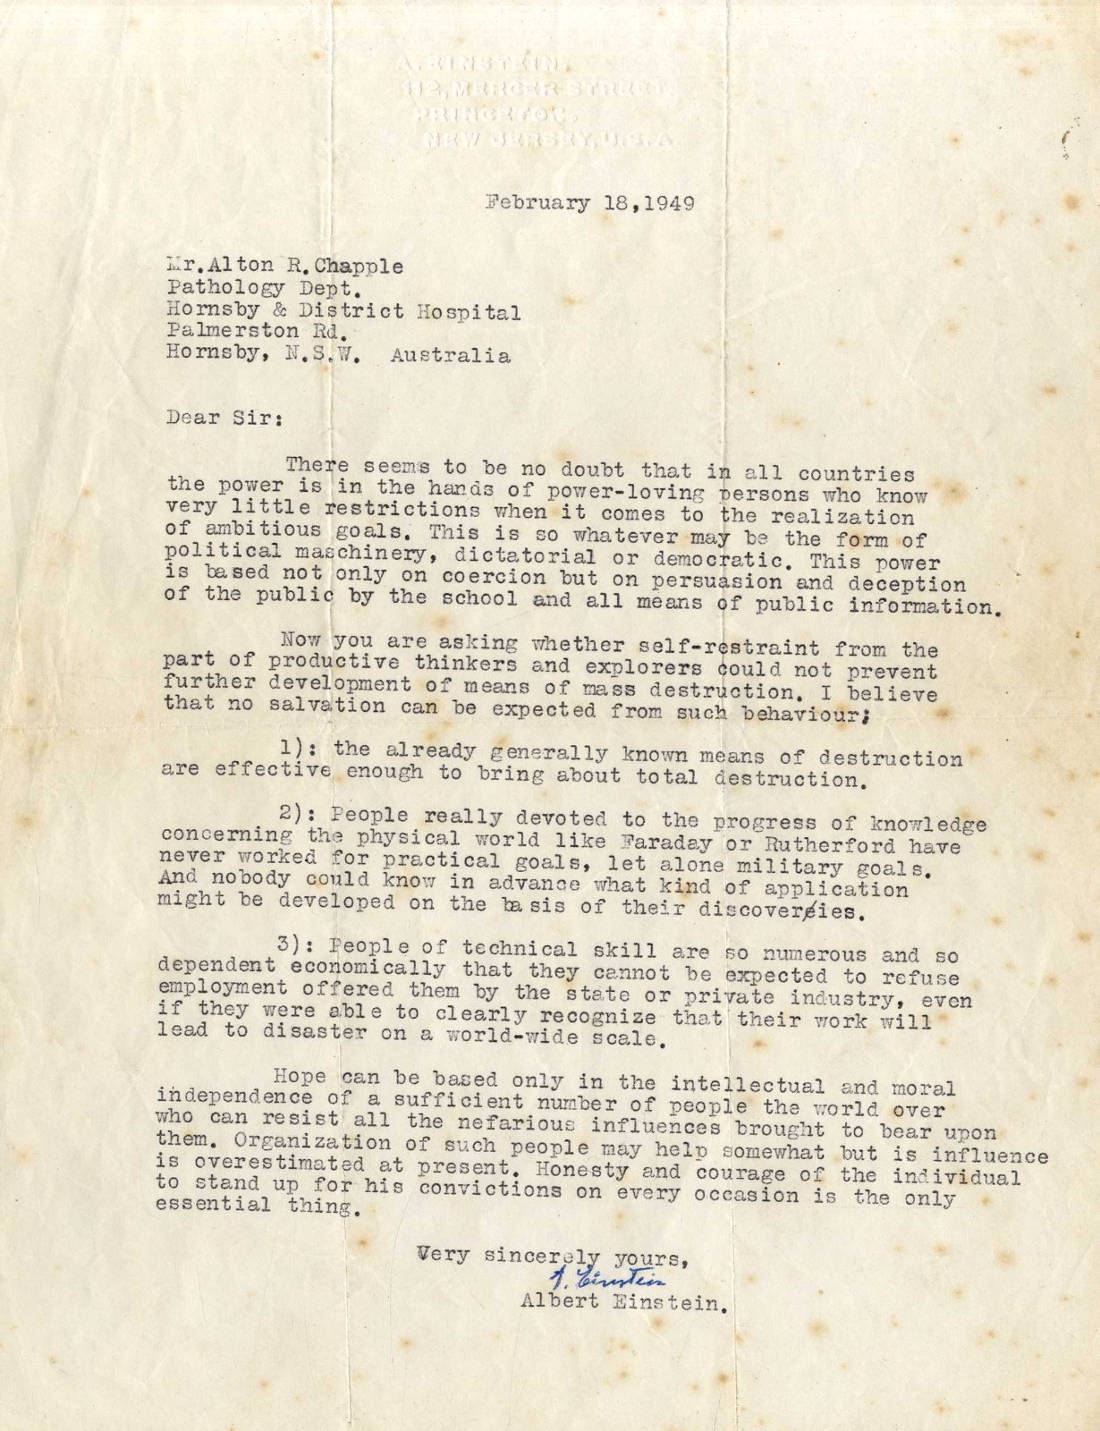 18 February 1949 letter. Einstein reply to Dr Alton R. Chapple.